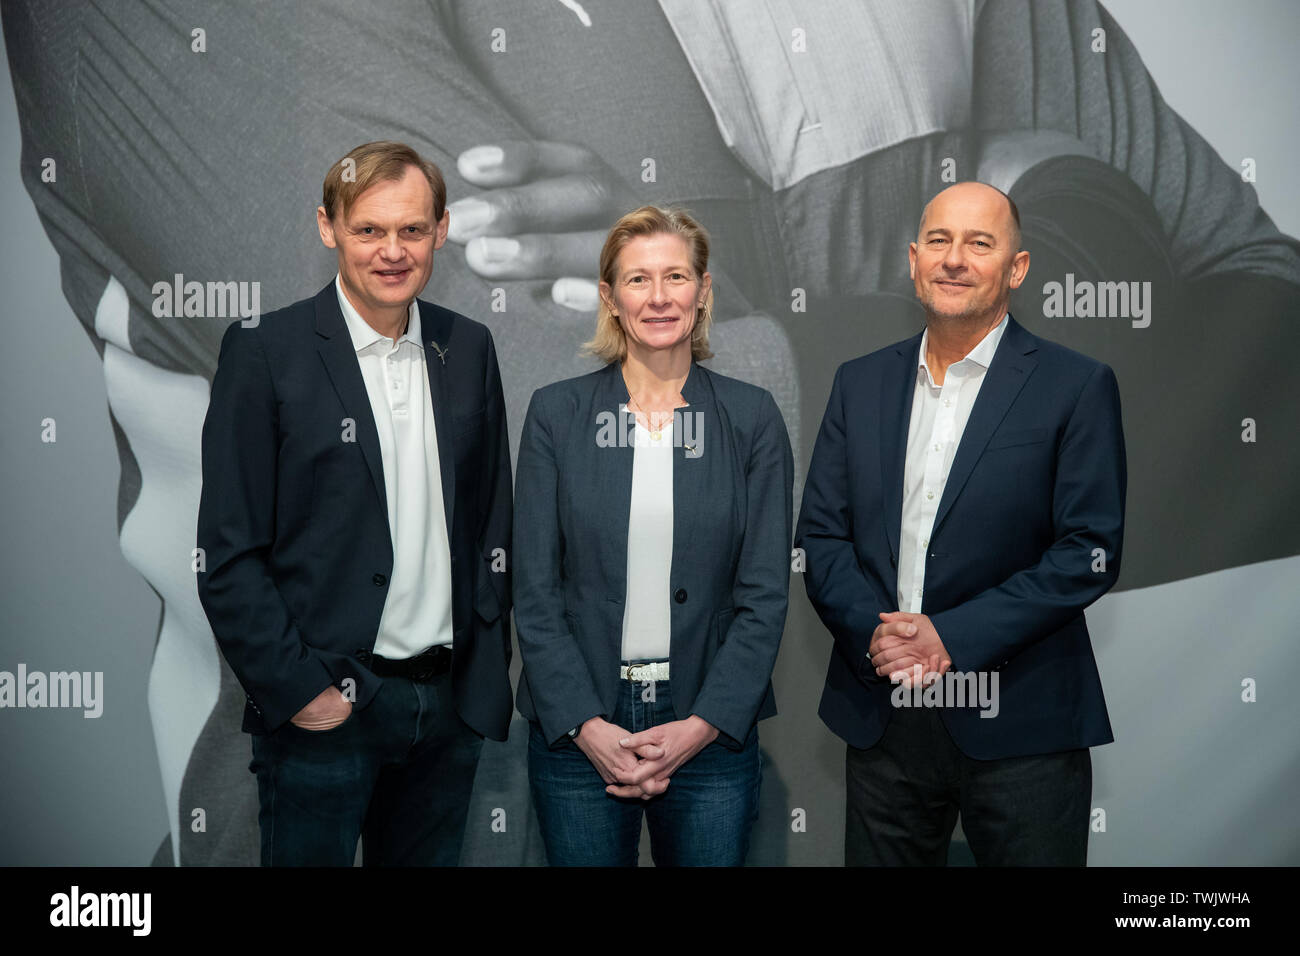 Herzogenaurach, Germany. 18th Apr, 2019. Björn Gulden (l-r), Chairman Managing Director of the sporting goods manufacturer Puma SE, Anne-Laure Descours, Chief Procurement Officer at Puma, and Michael Lämmermann, Chief Financial Officer of Puma, taken on the sidelines of the company's Annual General Meeting. Credit: Daniel Karmann/dpa/Alamy Live News Stock Photo